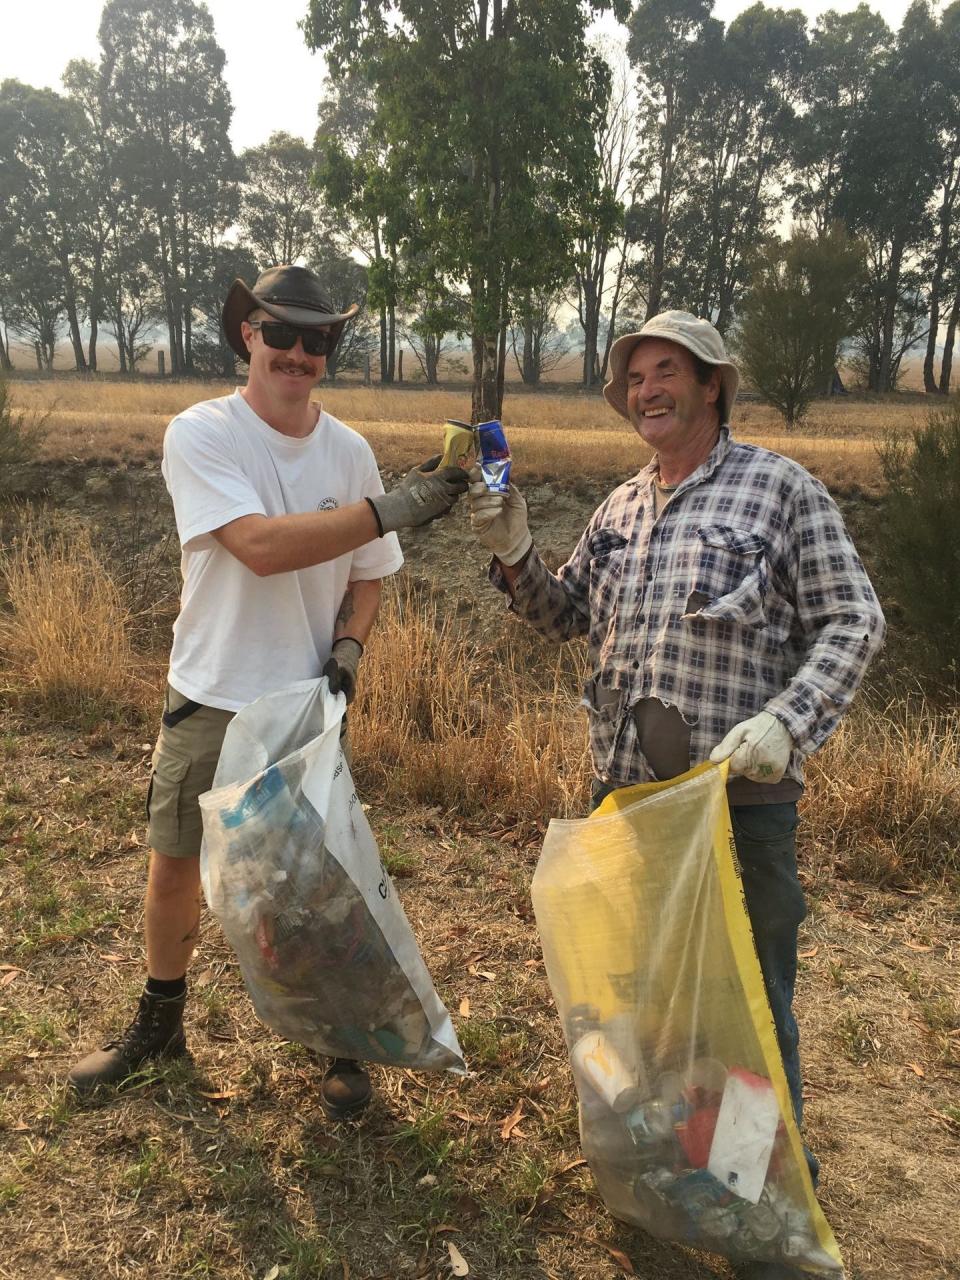 Two smiling men hold bags of rubbish